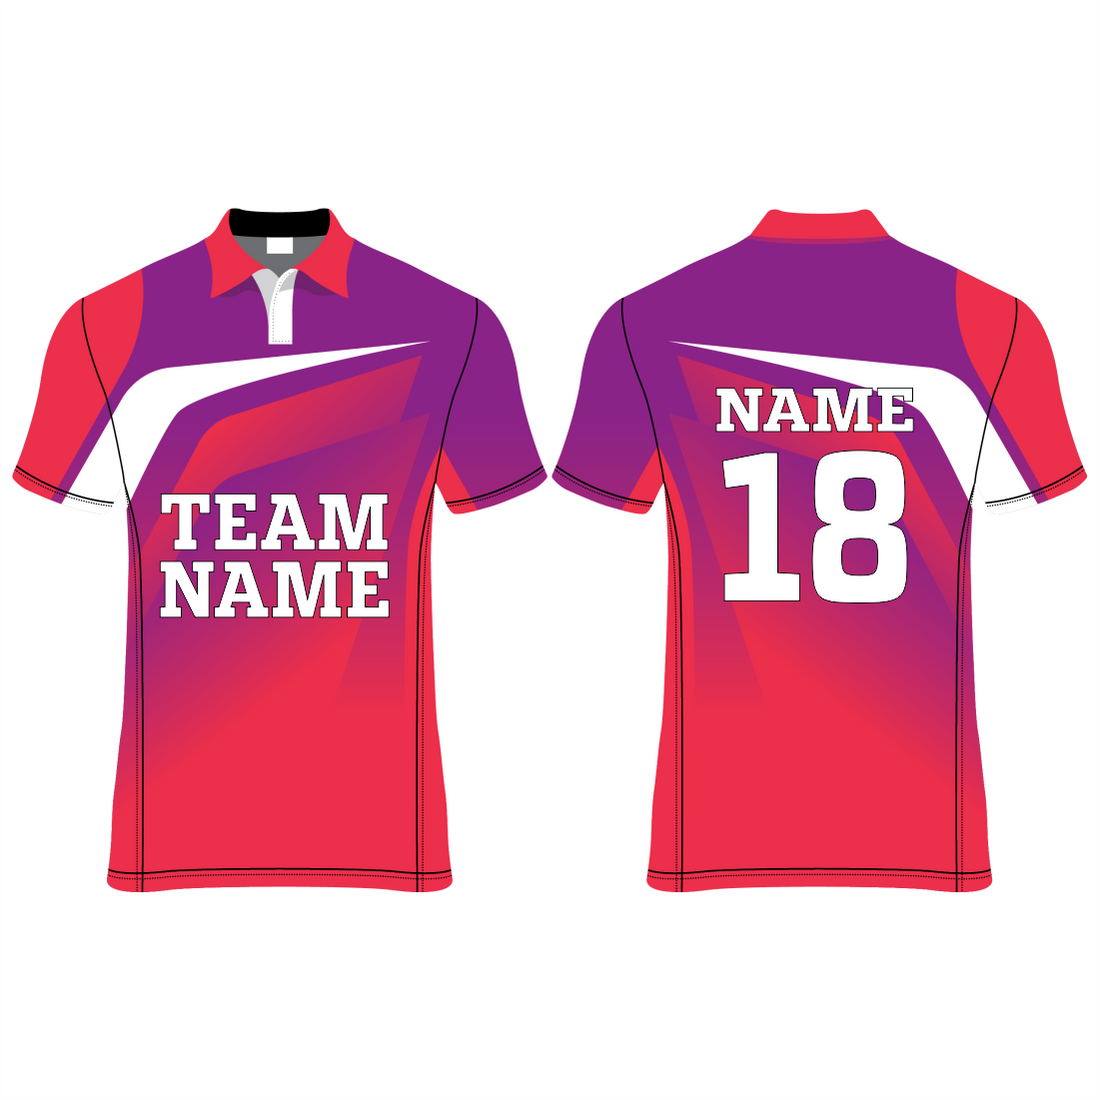 NEXT PRINT All Over Printed Customized Sublimation T-Shirt Unisex Sports Jersey Player Nam.& Number, Team Name.1925106719